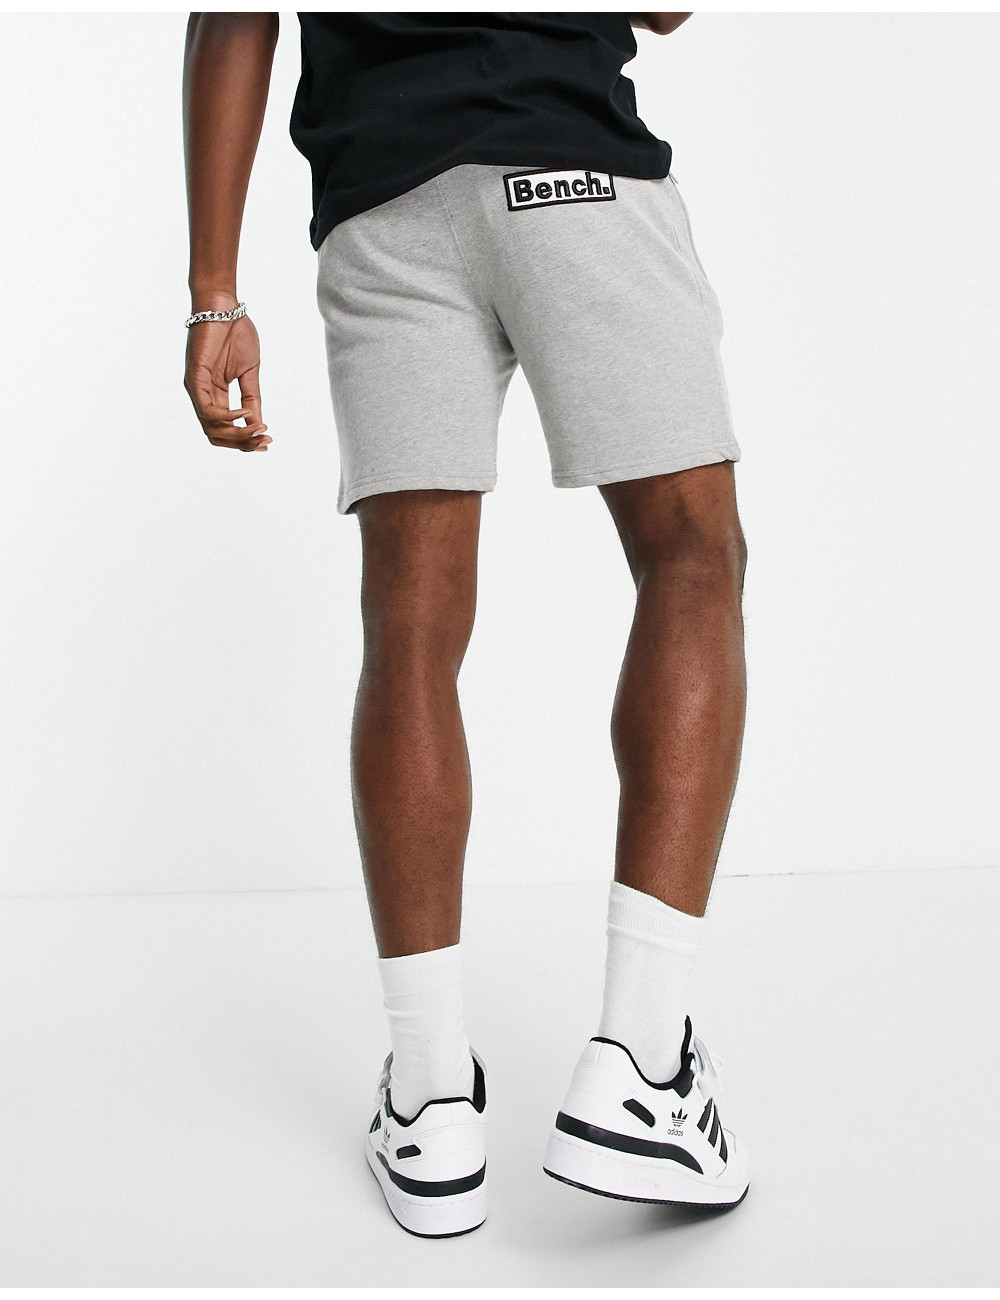 Bench jersey shorts in grey